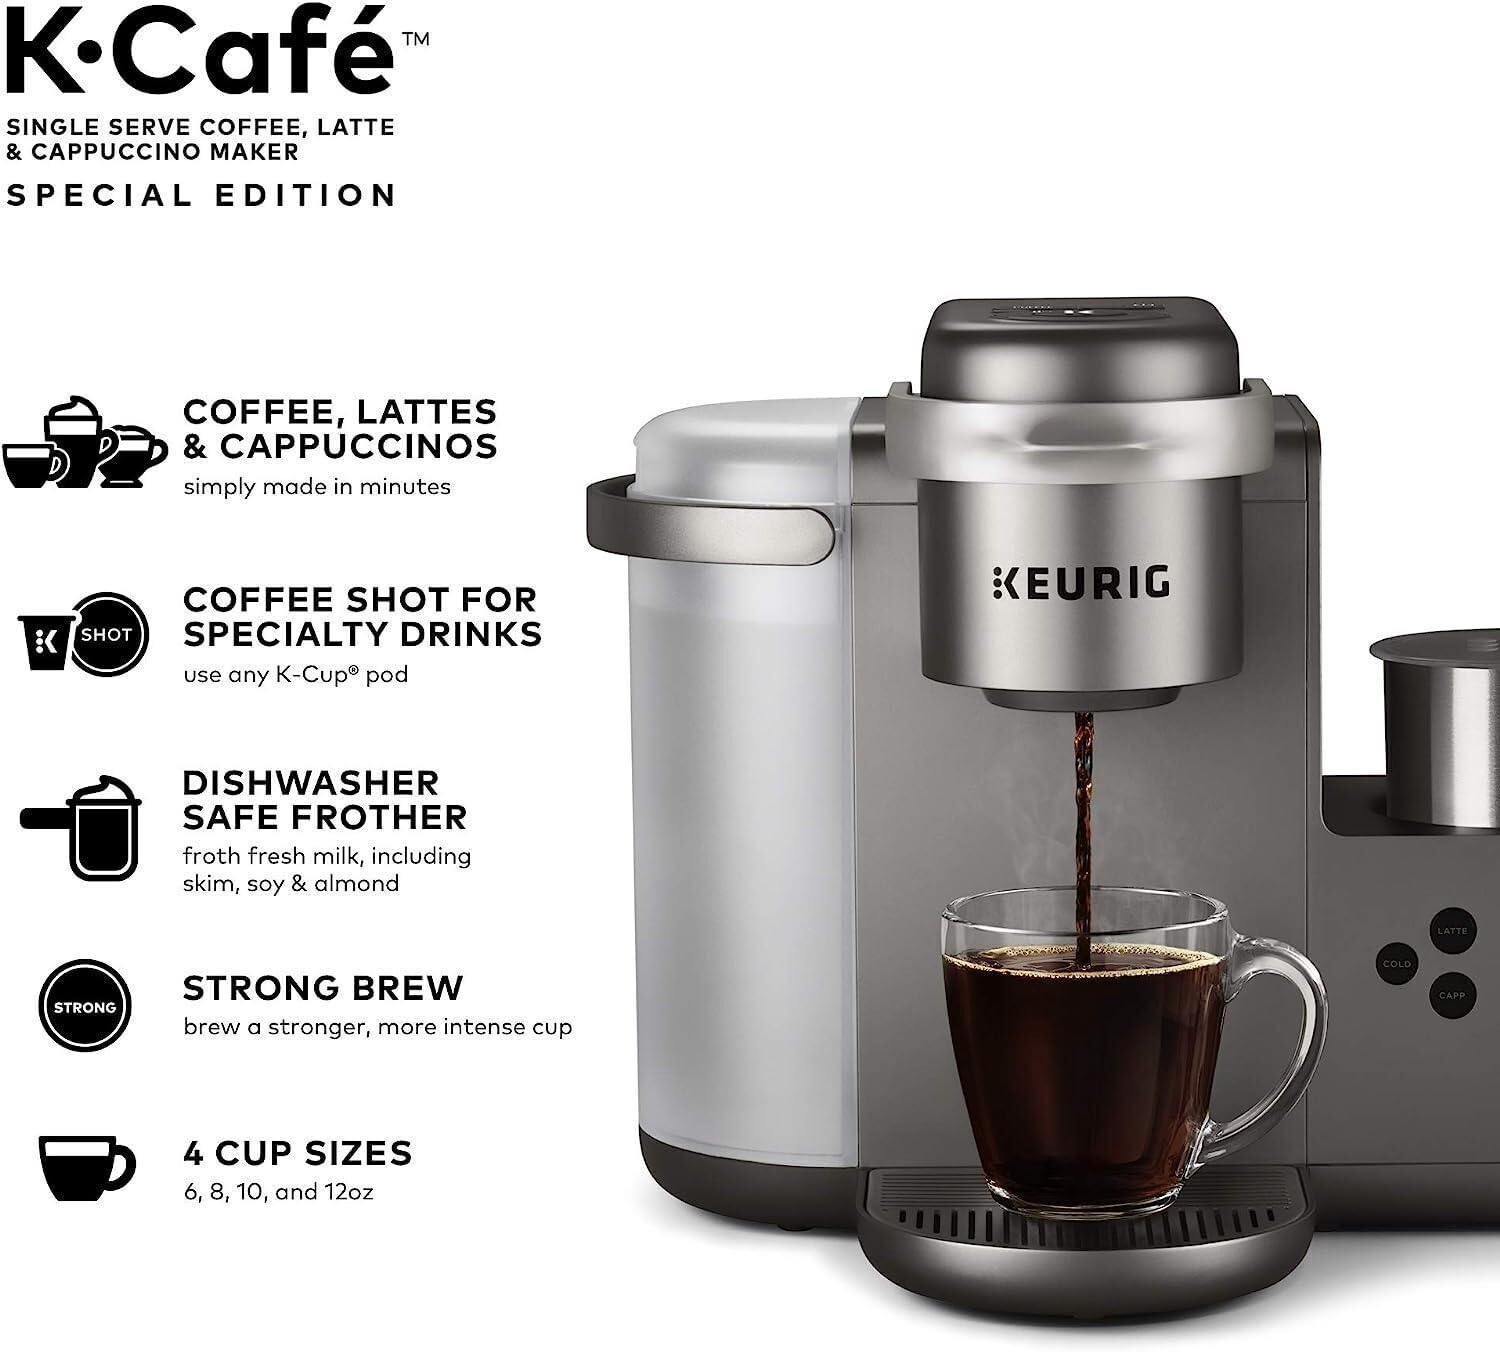 Keurig K-Cafe Special Edition Coffee Maker with Latte and Cappuccino Functionality (Nickel) Bundle with Donut Shop and Italian Medium Roast Coffee Pods and Stainless Steel Tumbler (4 Items)